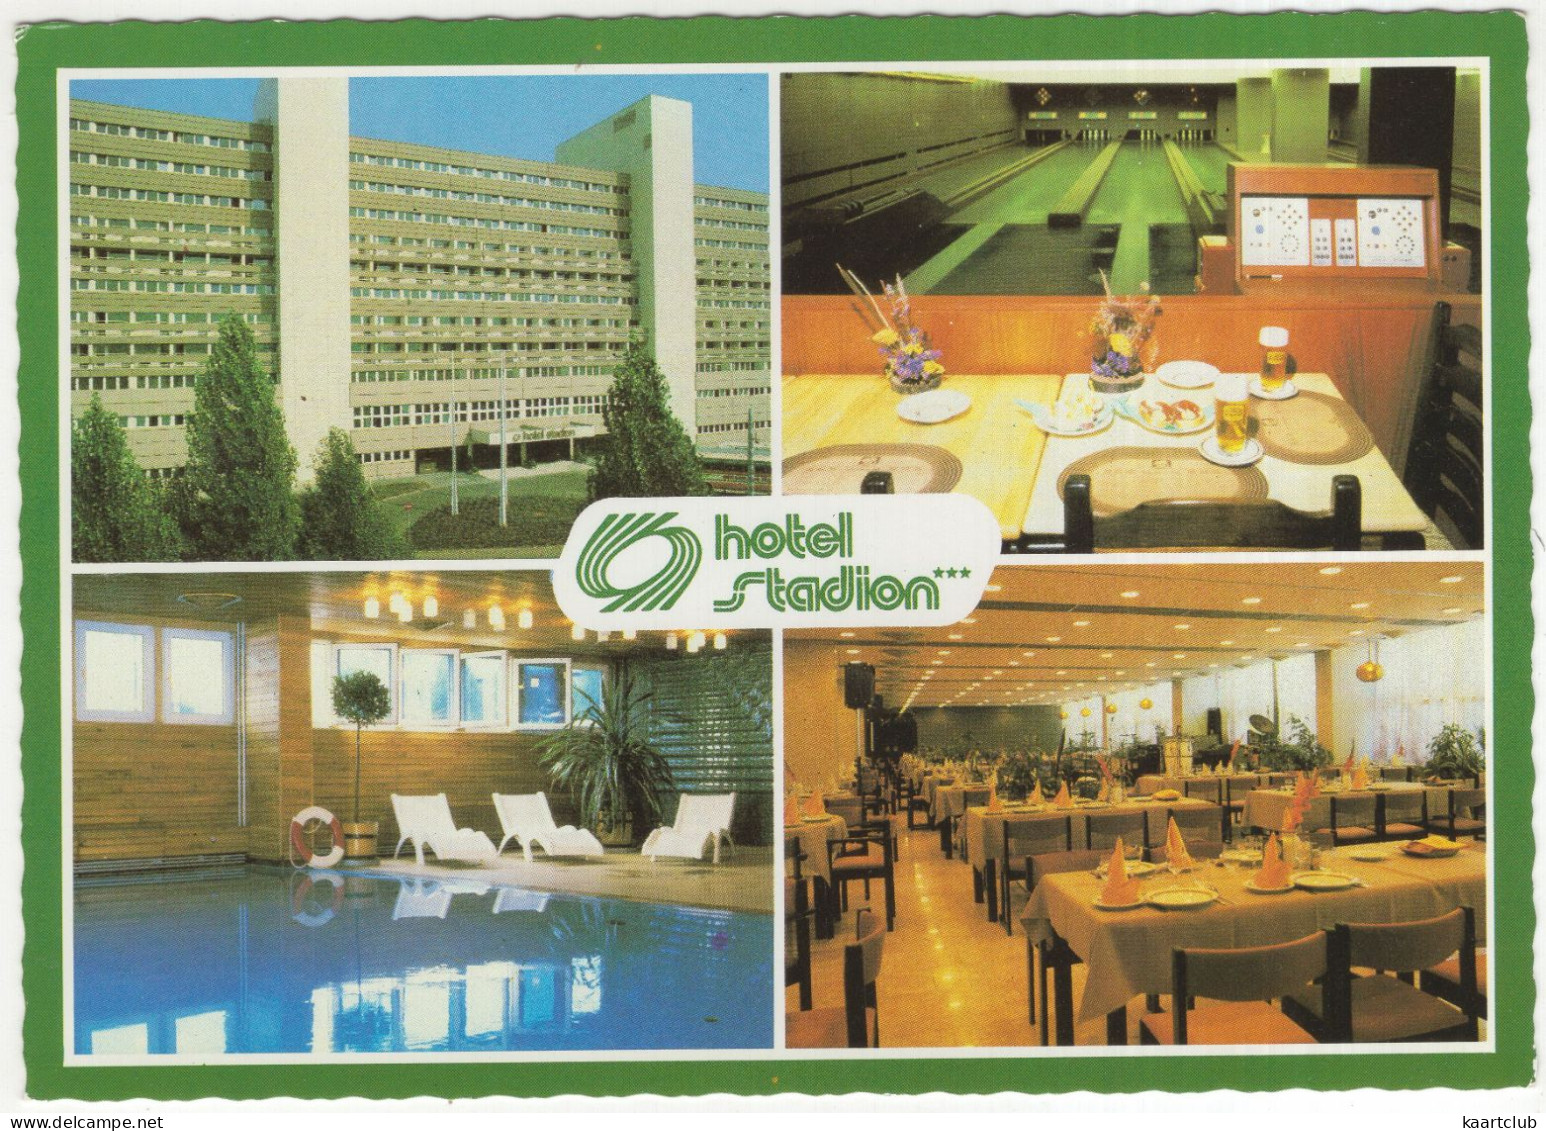 Budapest XIV. - Hotel ' Stadion' - (Hungary) - In-  & Exterior - Swimmingpool, Bowling - Hungary